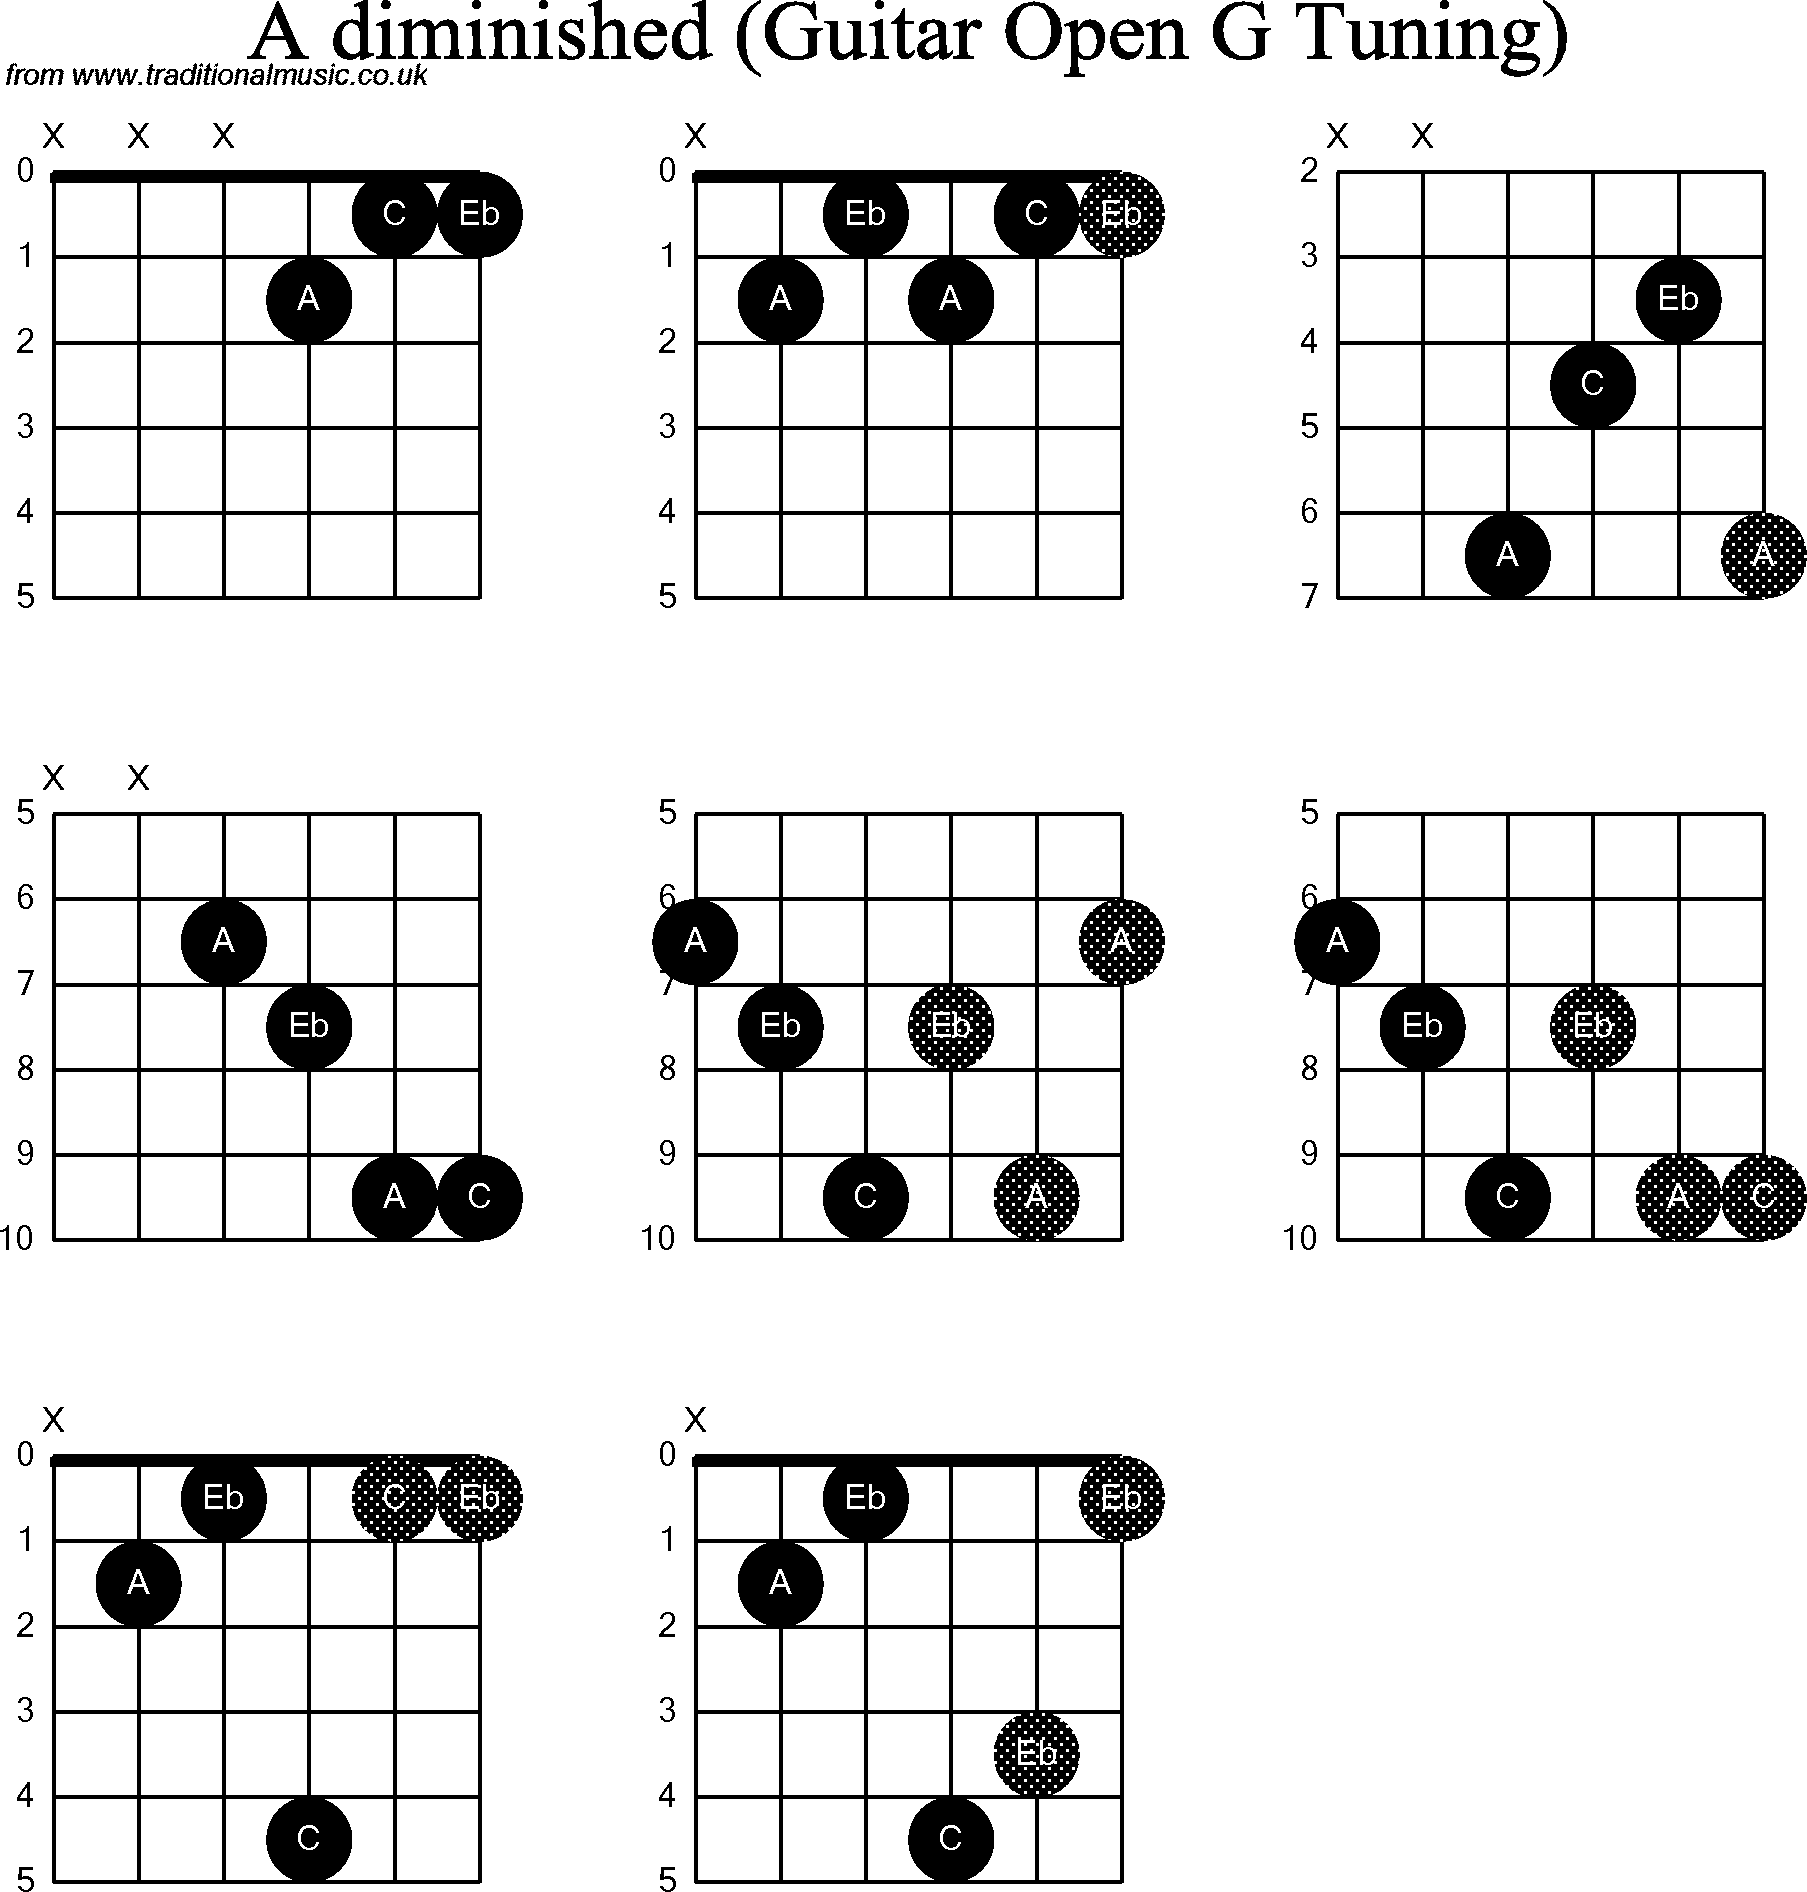 Chord diagrams for Dobro A Diminished